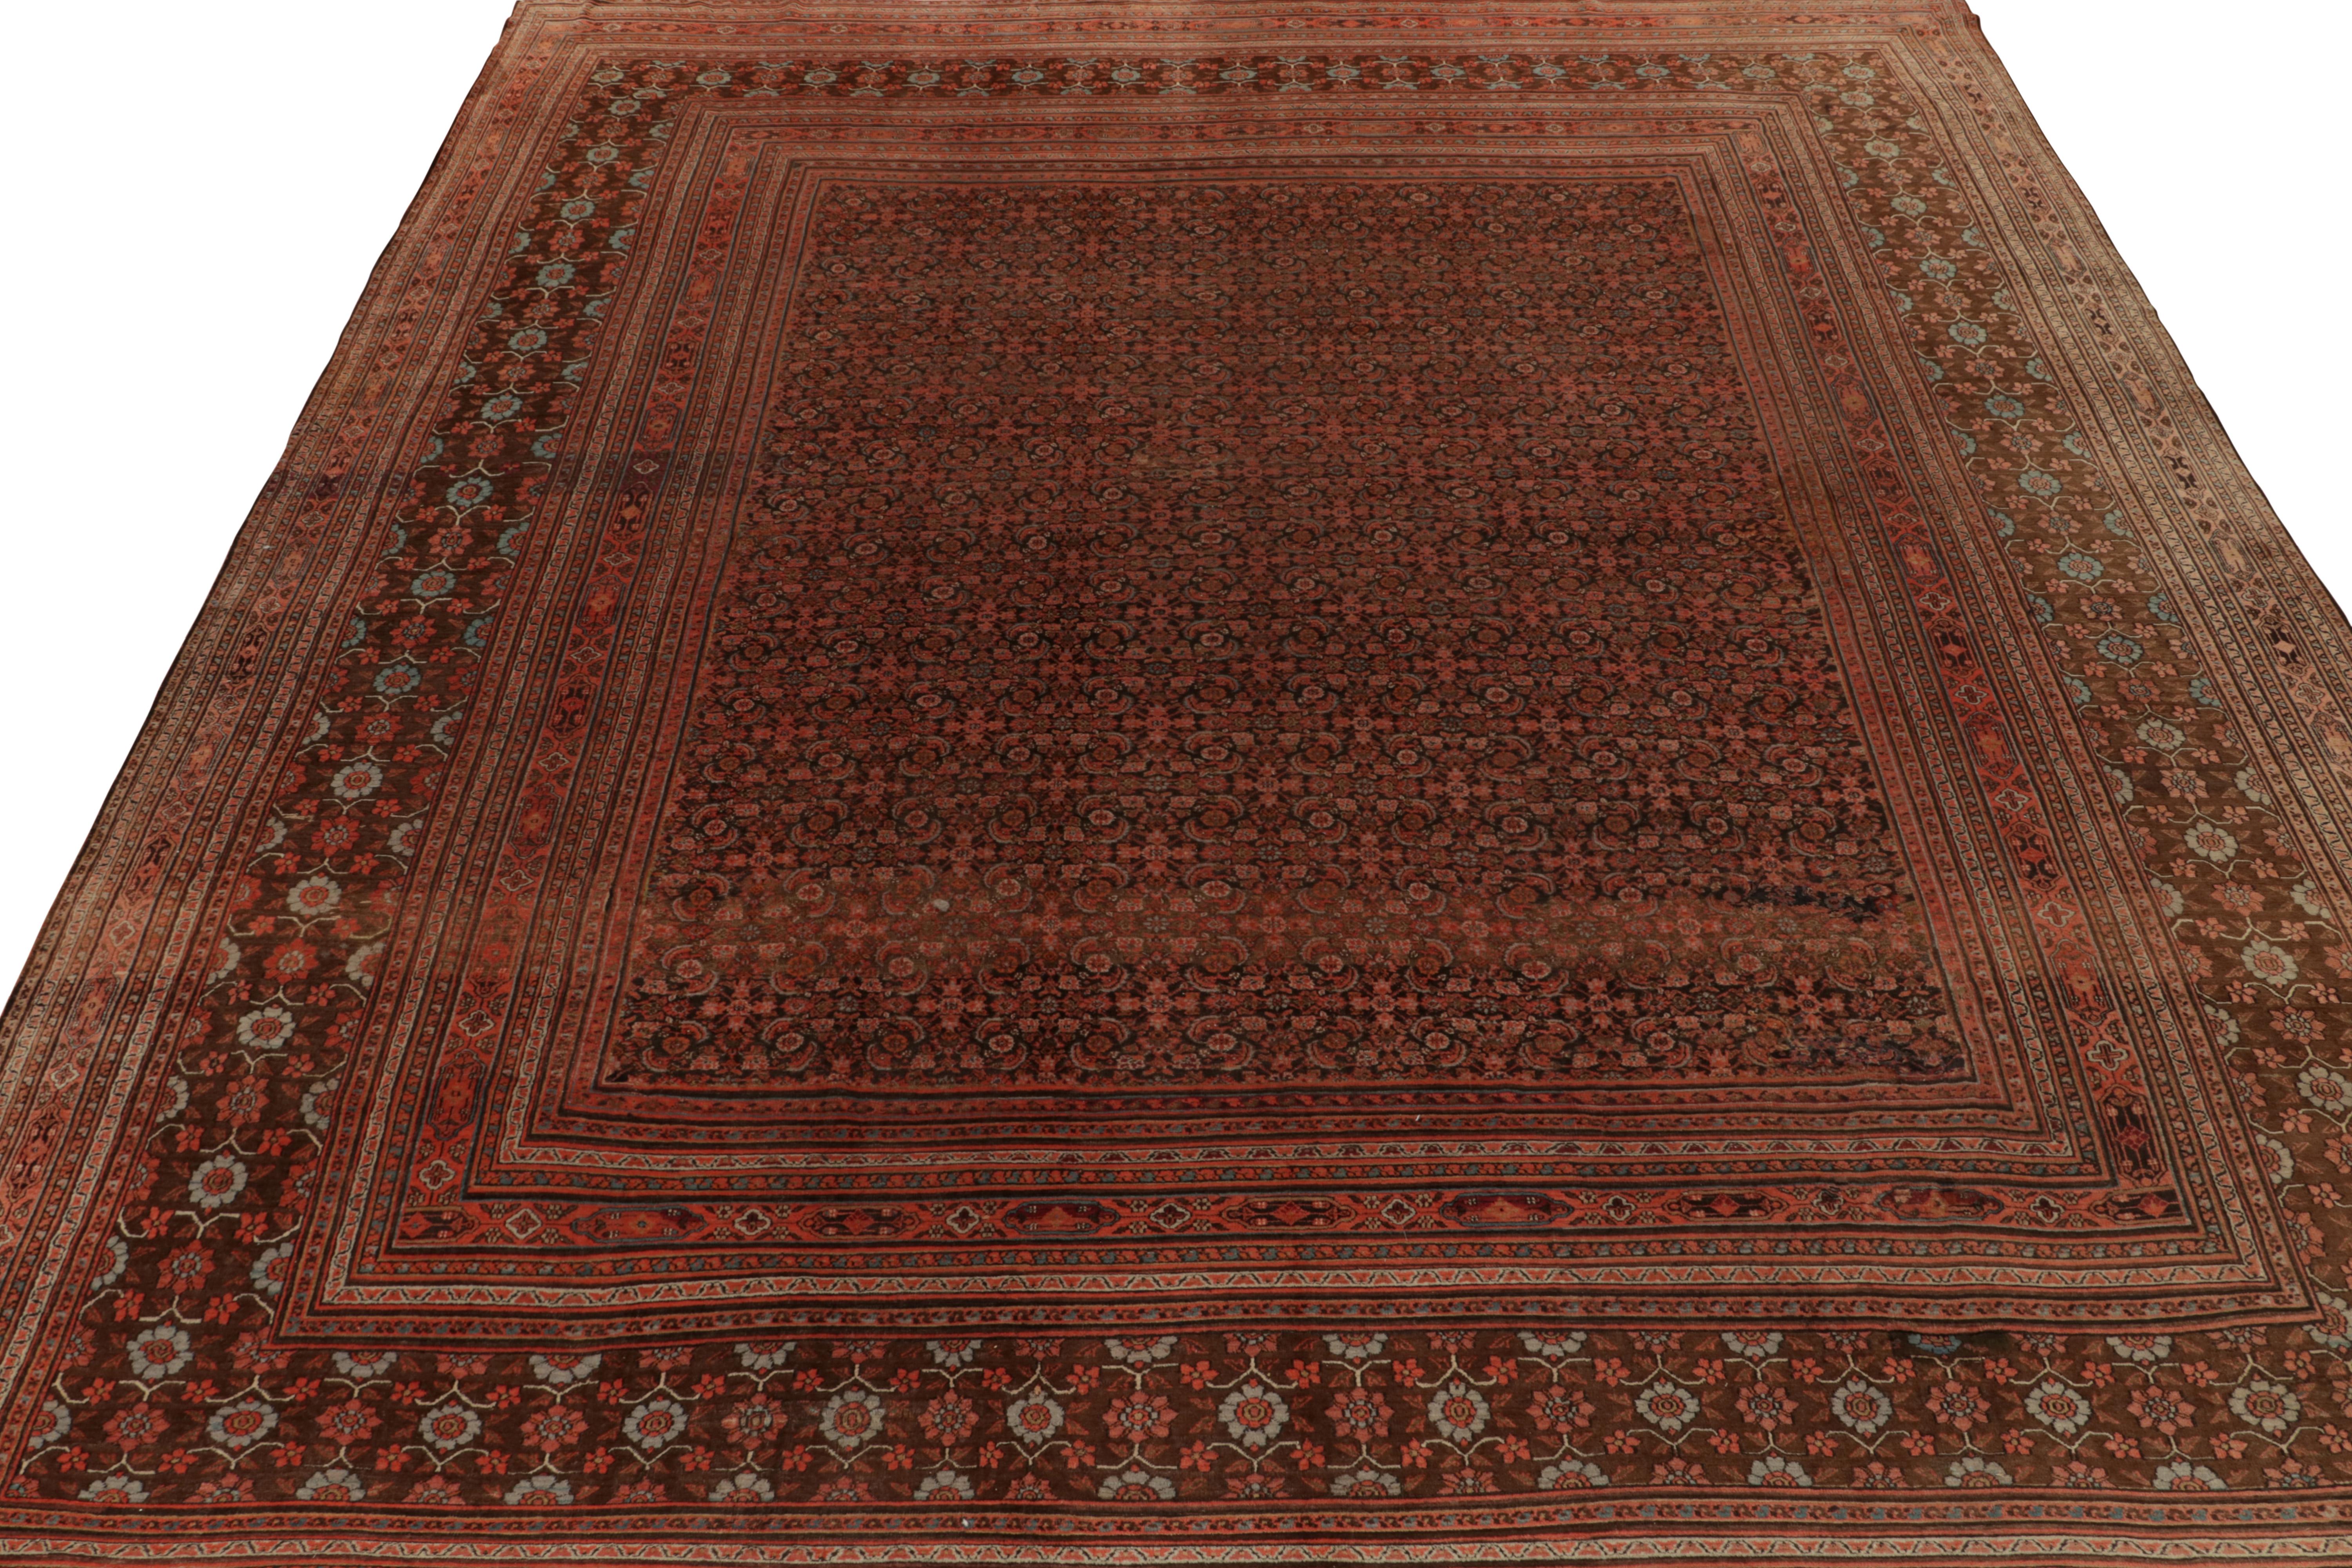 Connoting the finest lineages of Persian rugs, Rug & Kilim welcomes this 17x19 Doroksh rug of the 1880s to its reputed Antique & Vintage collection. The classic piece reflects the traditional Herati pattern (or “fish” pattern) cocooned in